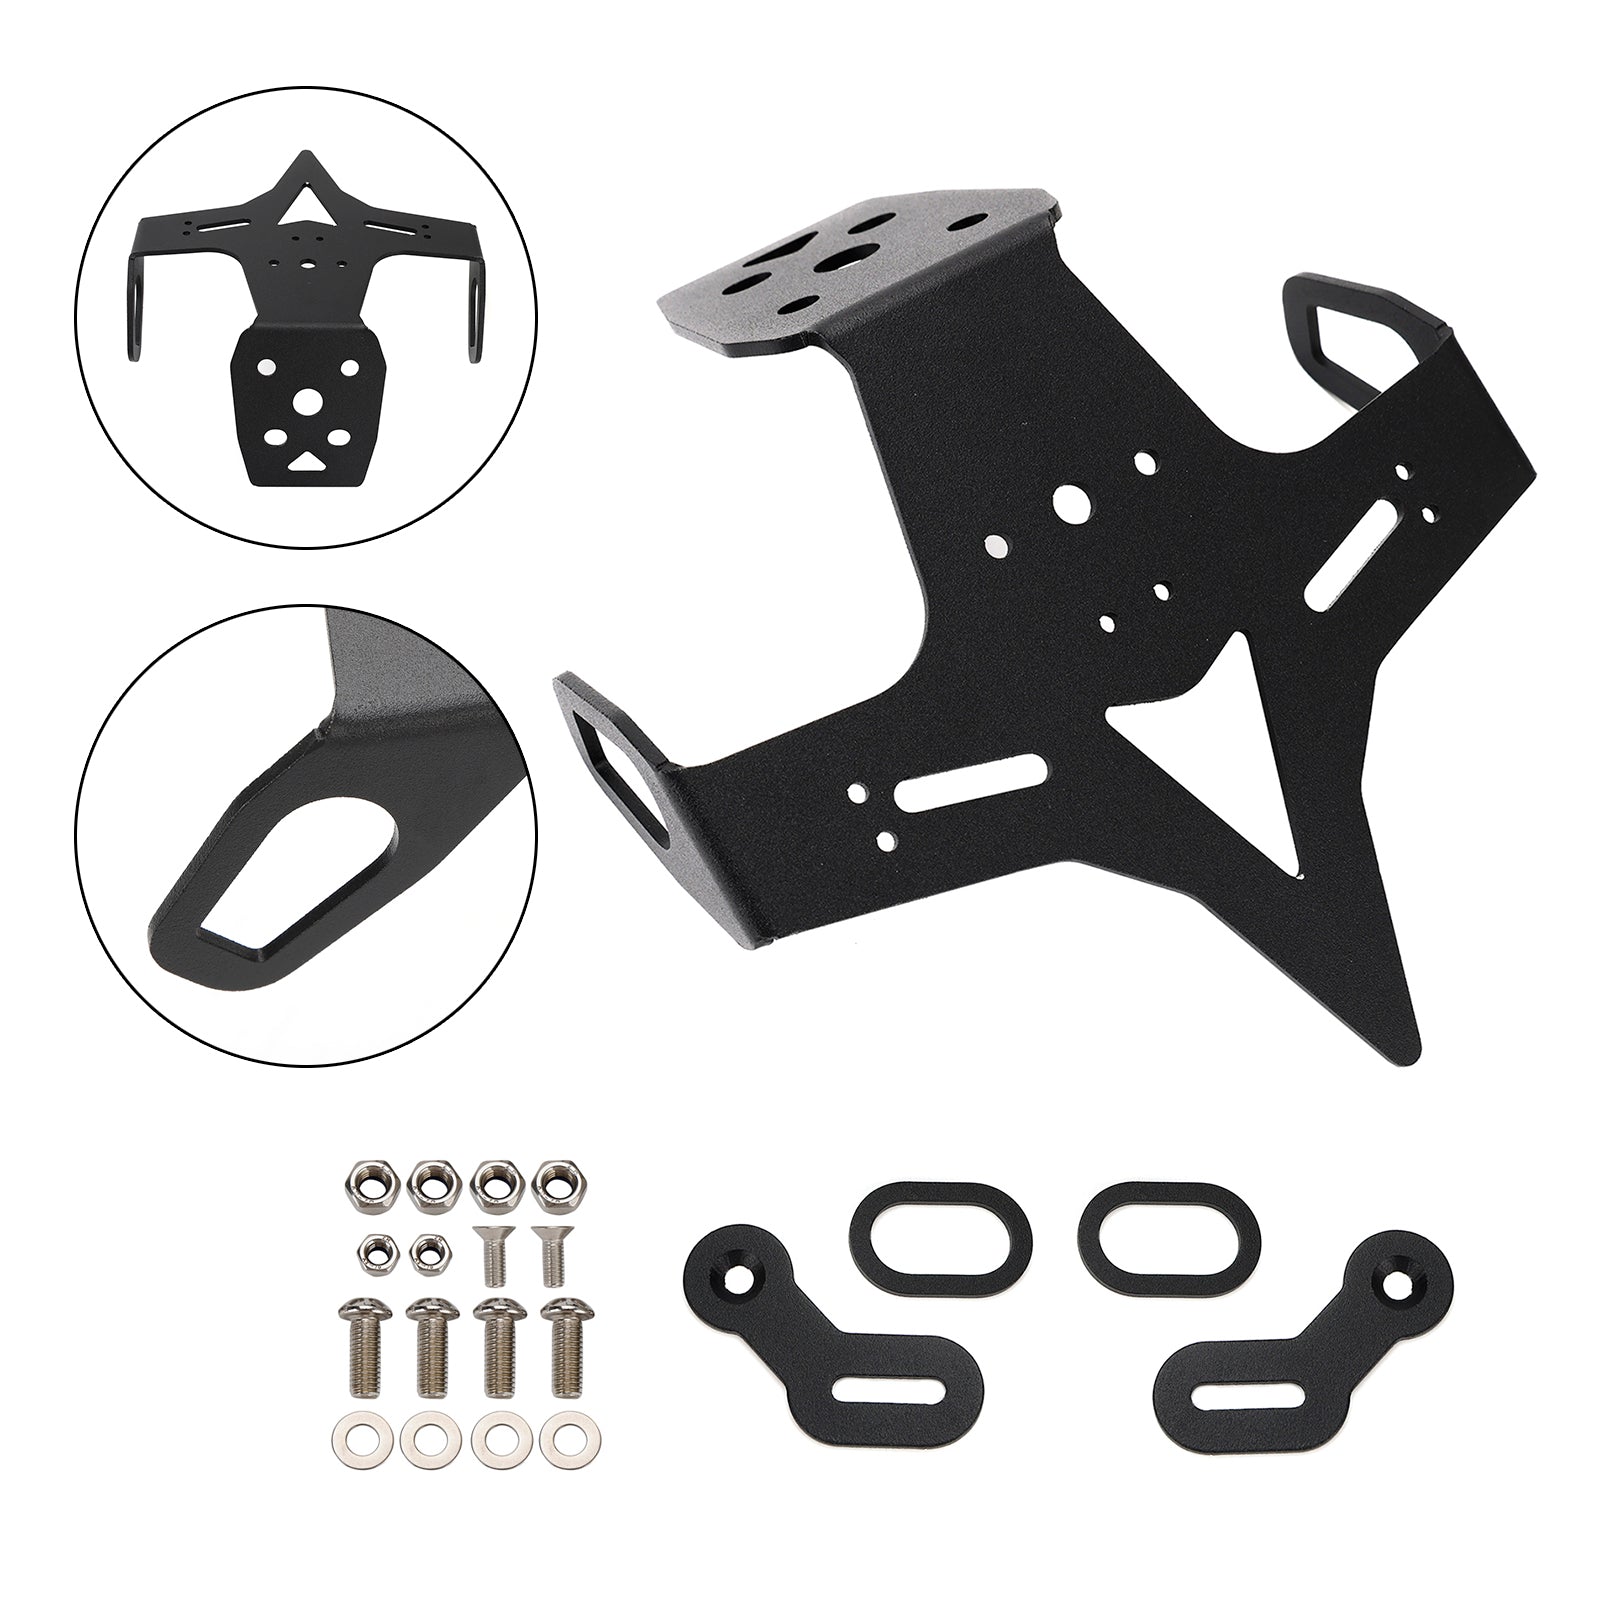 License Plate Holder Bracket fit for KAWASAKI ZX-25R 2021-2022